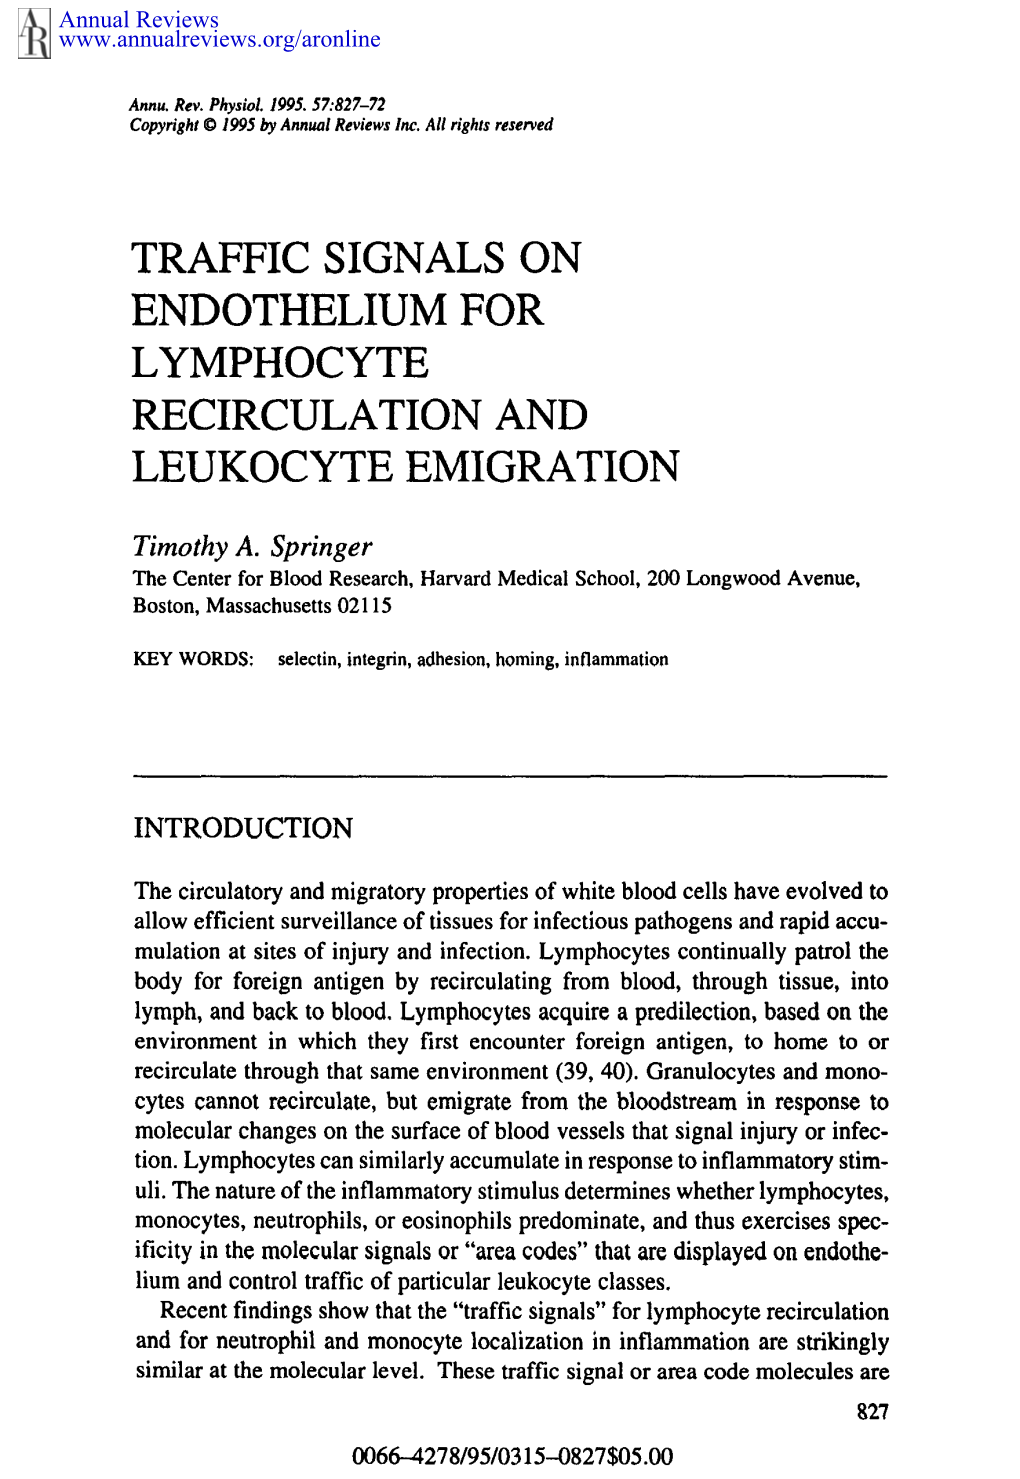 Traffic Signals on Endothelium for Lymphocyte Recirculation And